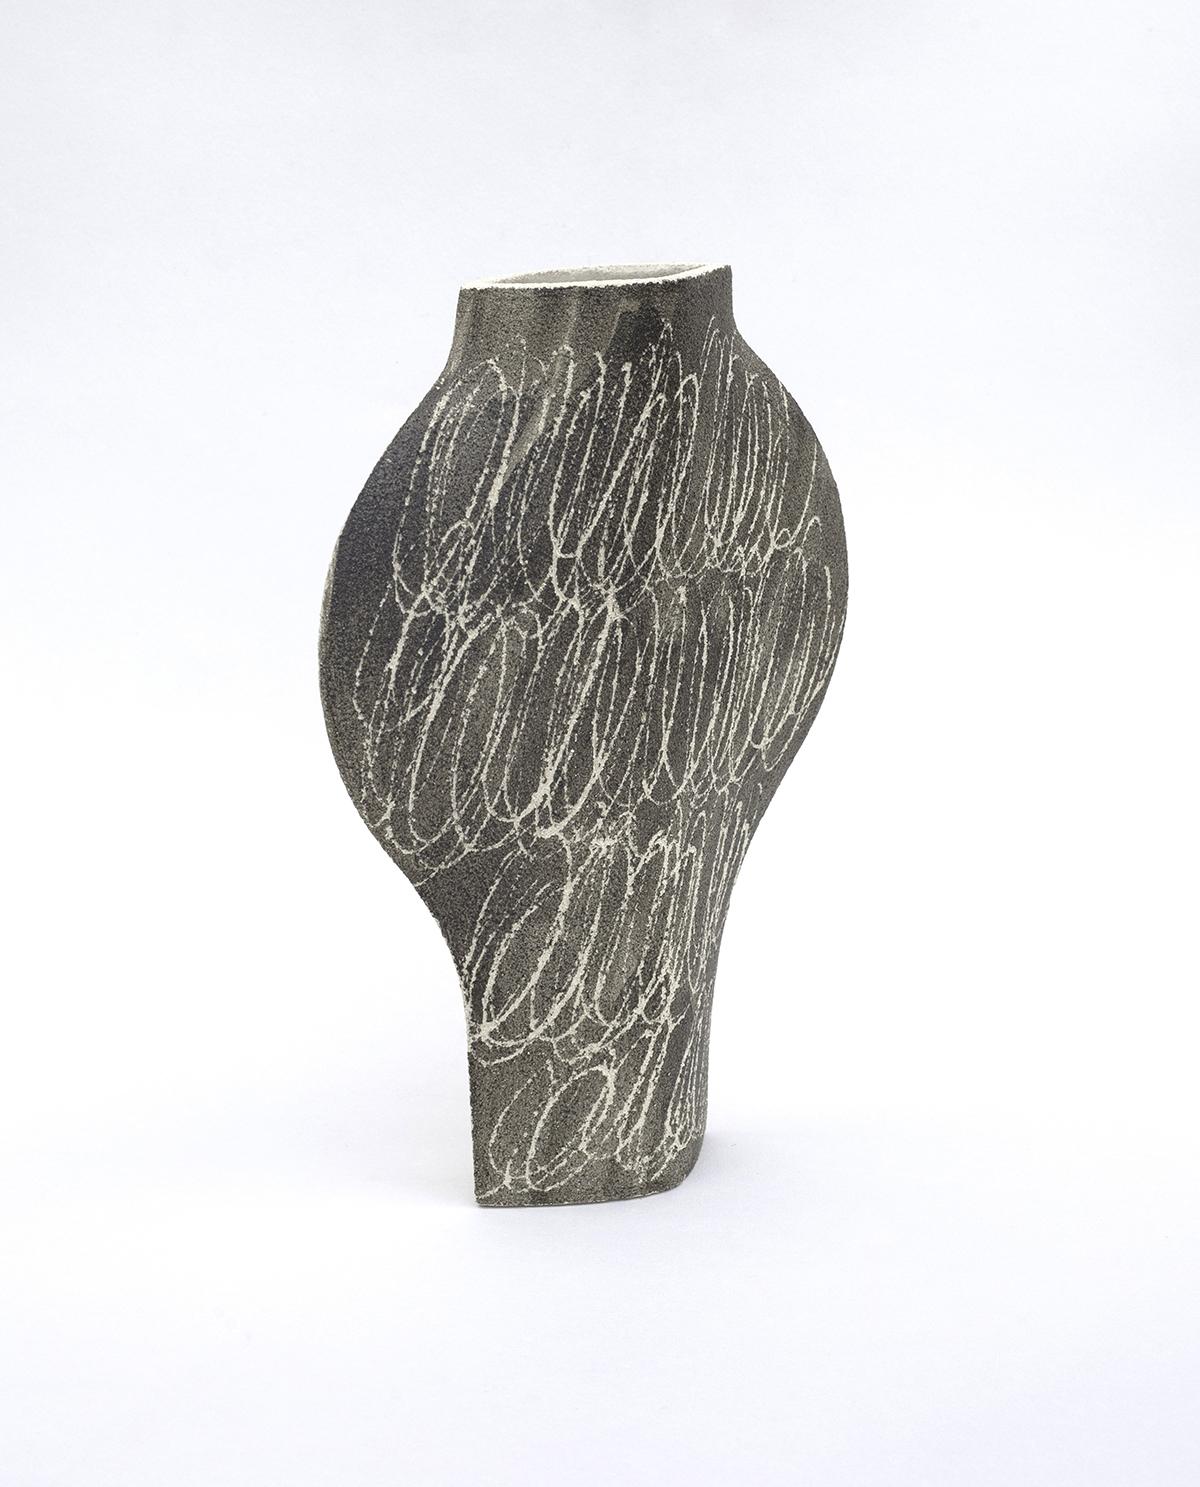 ‘Dal Negative Circles Black’ ceramic vase

This vase is part of a new series inspired by iconic Art (and more precisely paintings) movements. Here is our DAL model with motifs based on abstract paintings. The motifs are applied to the vase before